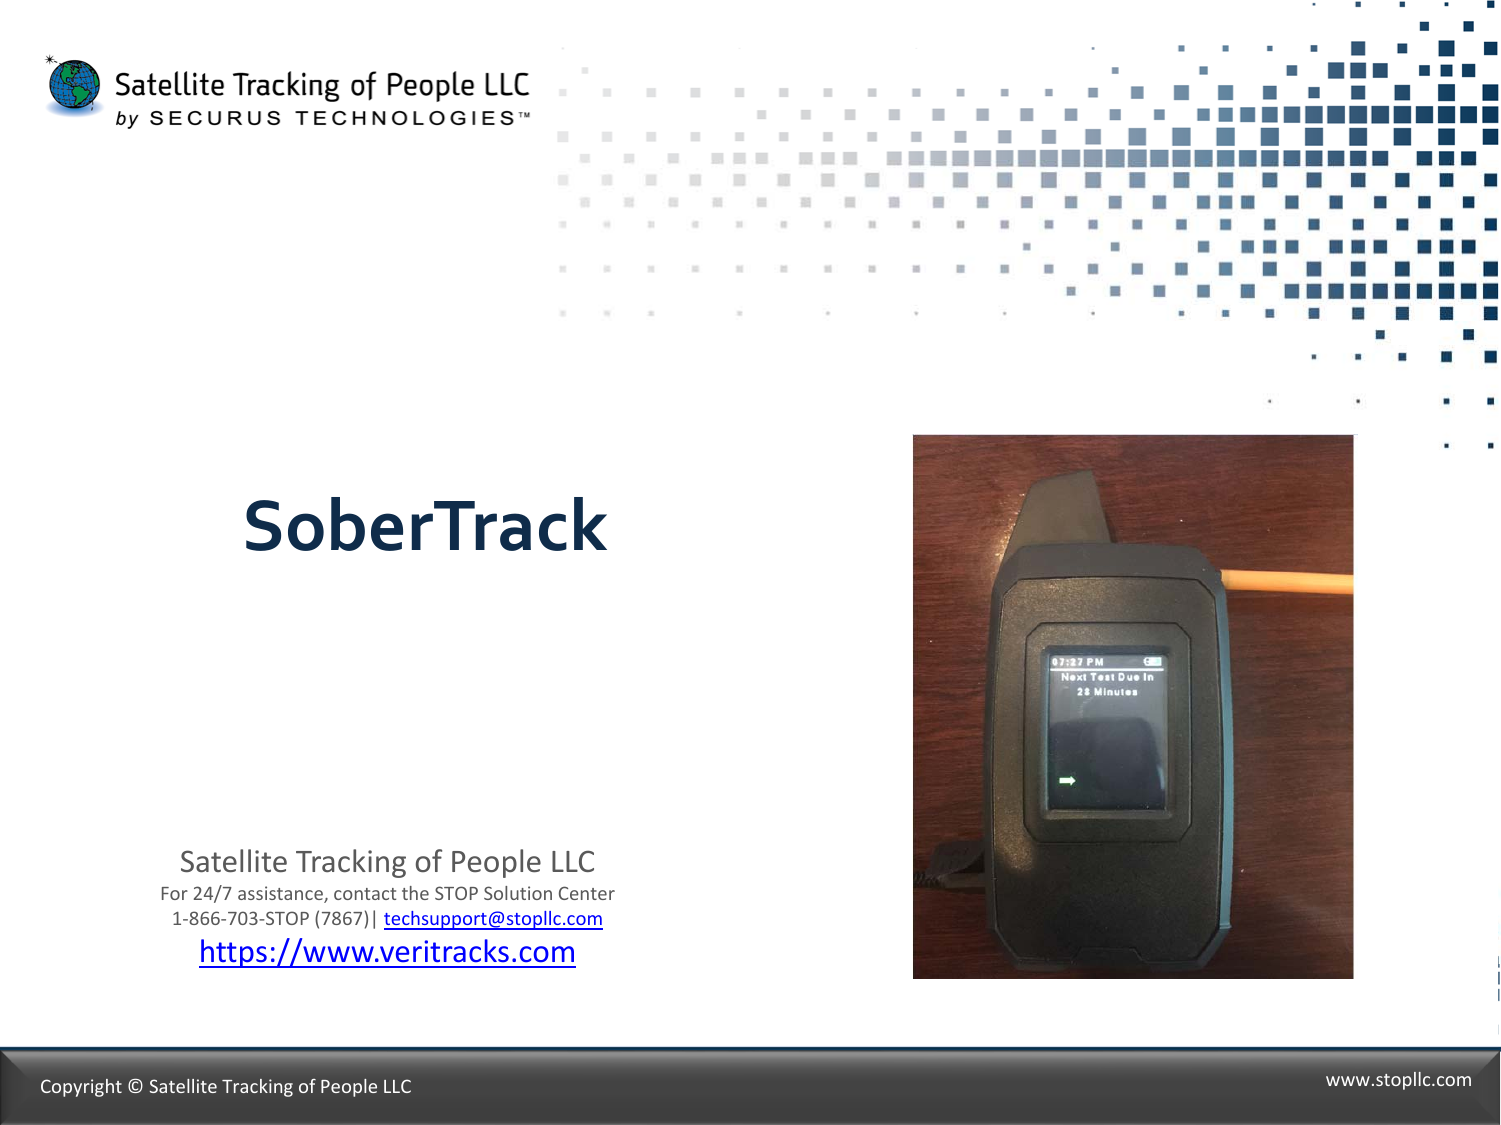 SoberTrackSatelliteTrackingofPeopleLLCFor24/7assistance,contacttheSTOPSolutionCenter1‐866‐703‐STOP(7867)|techsupport@stopllc.comhttps://www.veritracks.comCopyright©SatelliteTrackingofPeopleLLC www.stopllc.com